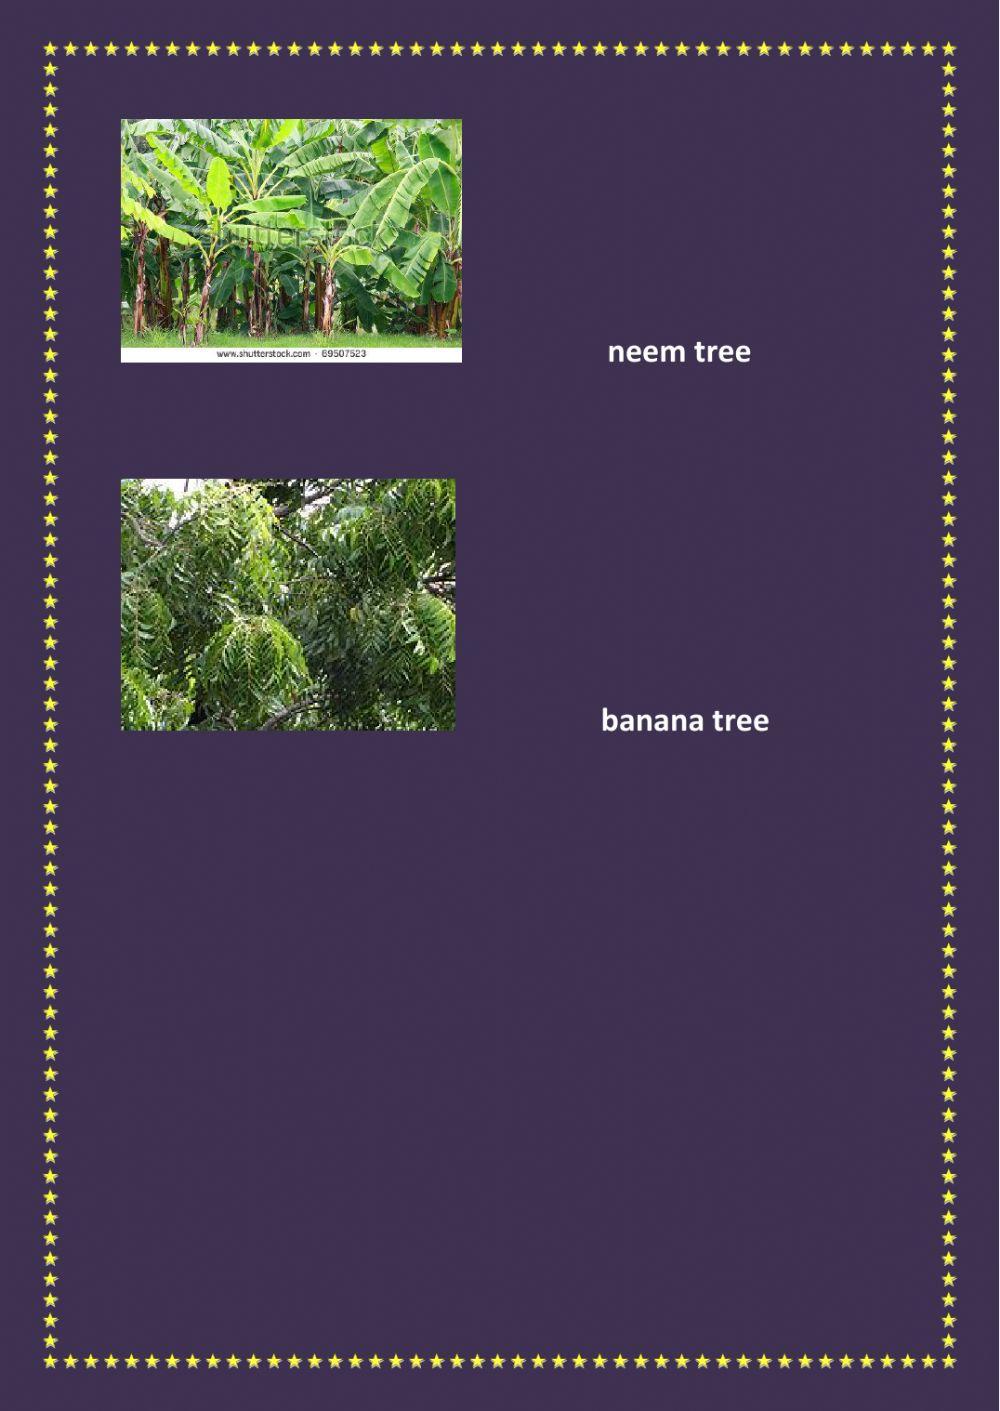 match the names of the trees